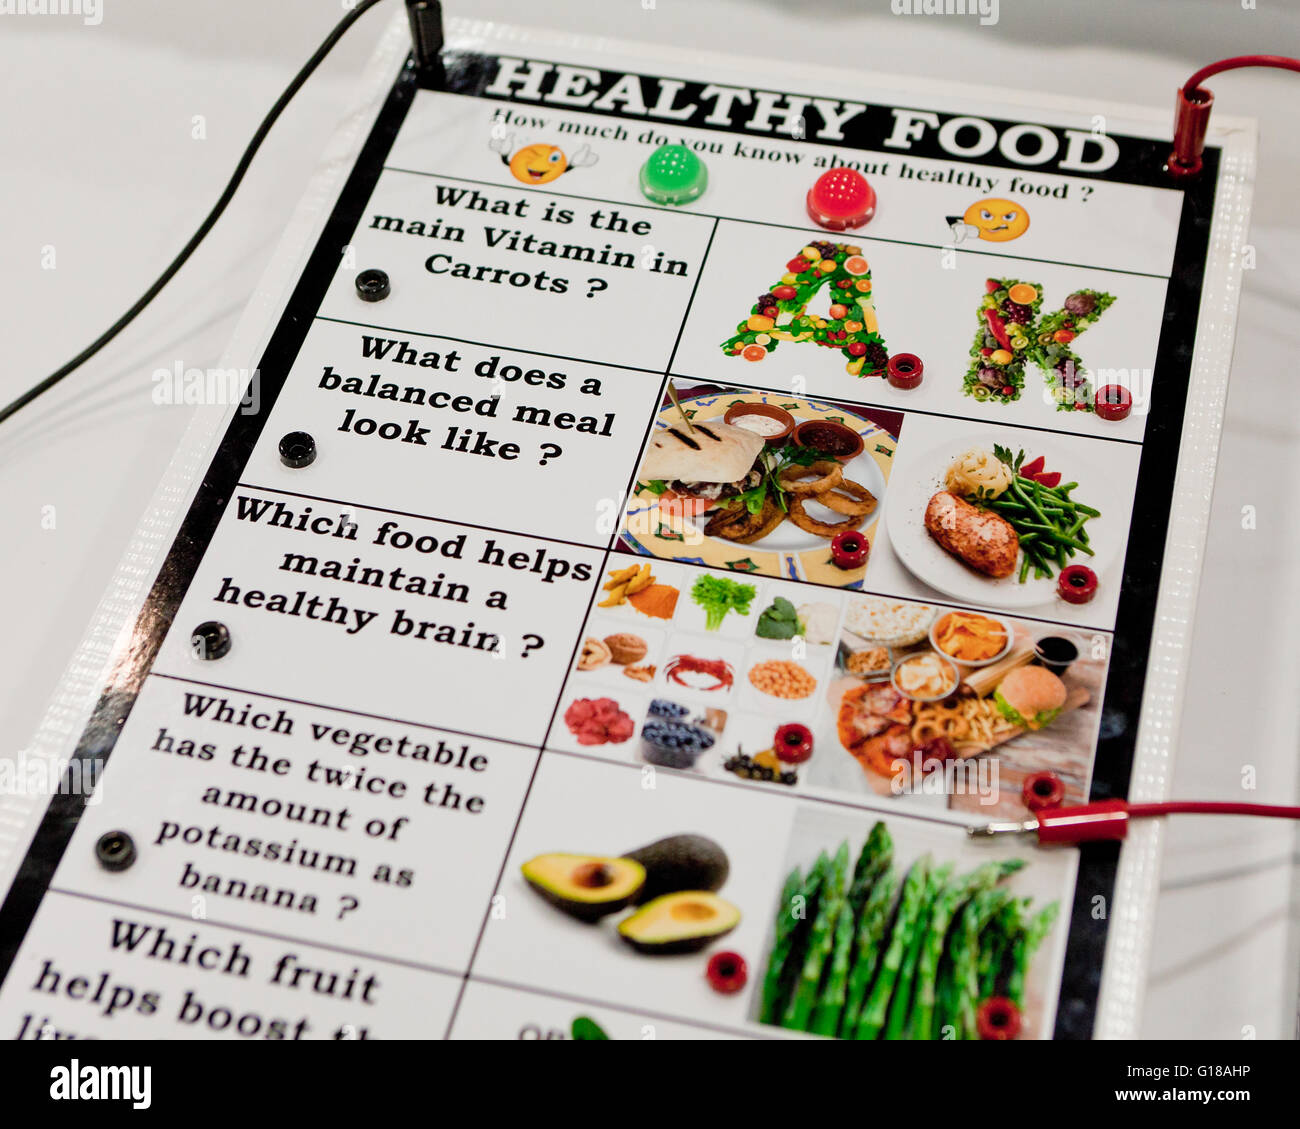 Healthy food game board made by students exhibited at science fair - USA Stock Photo